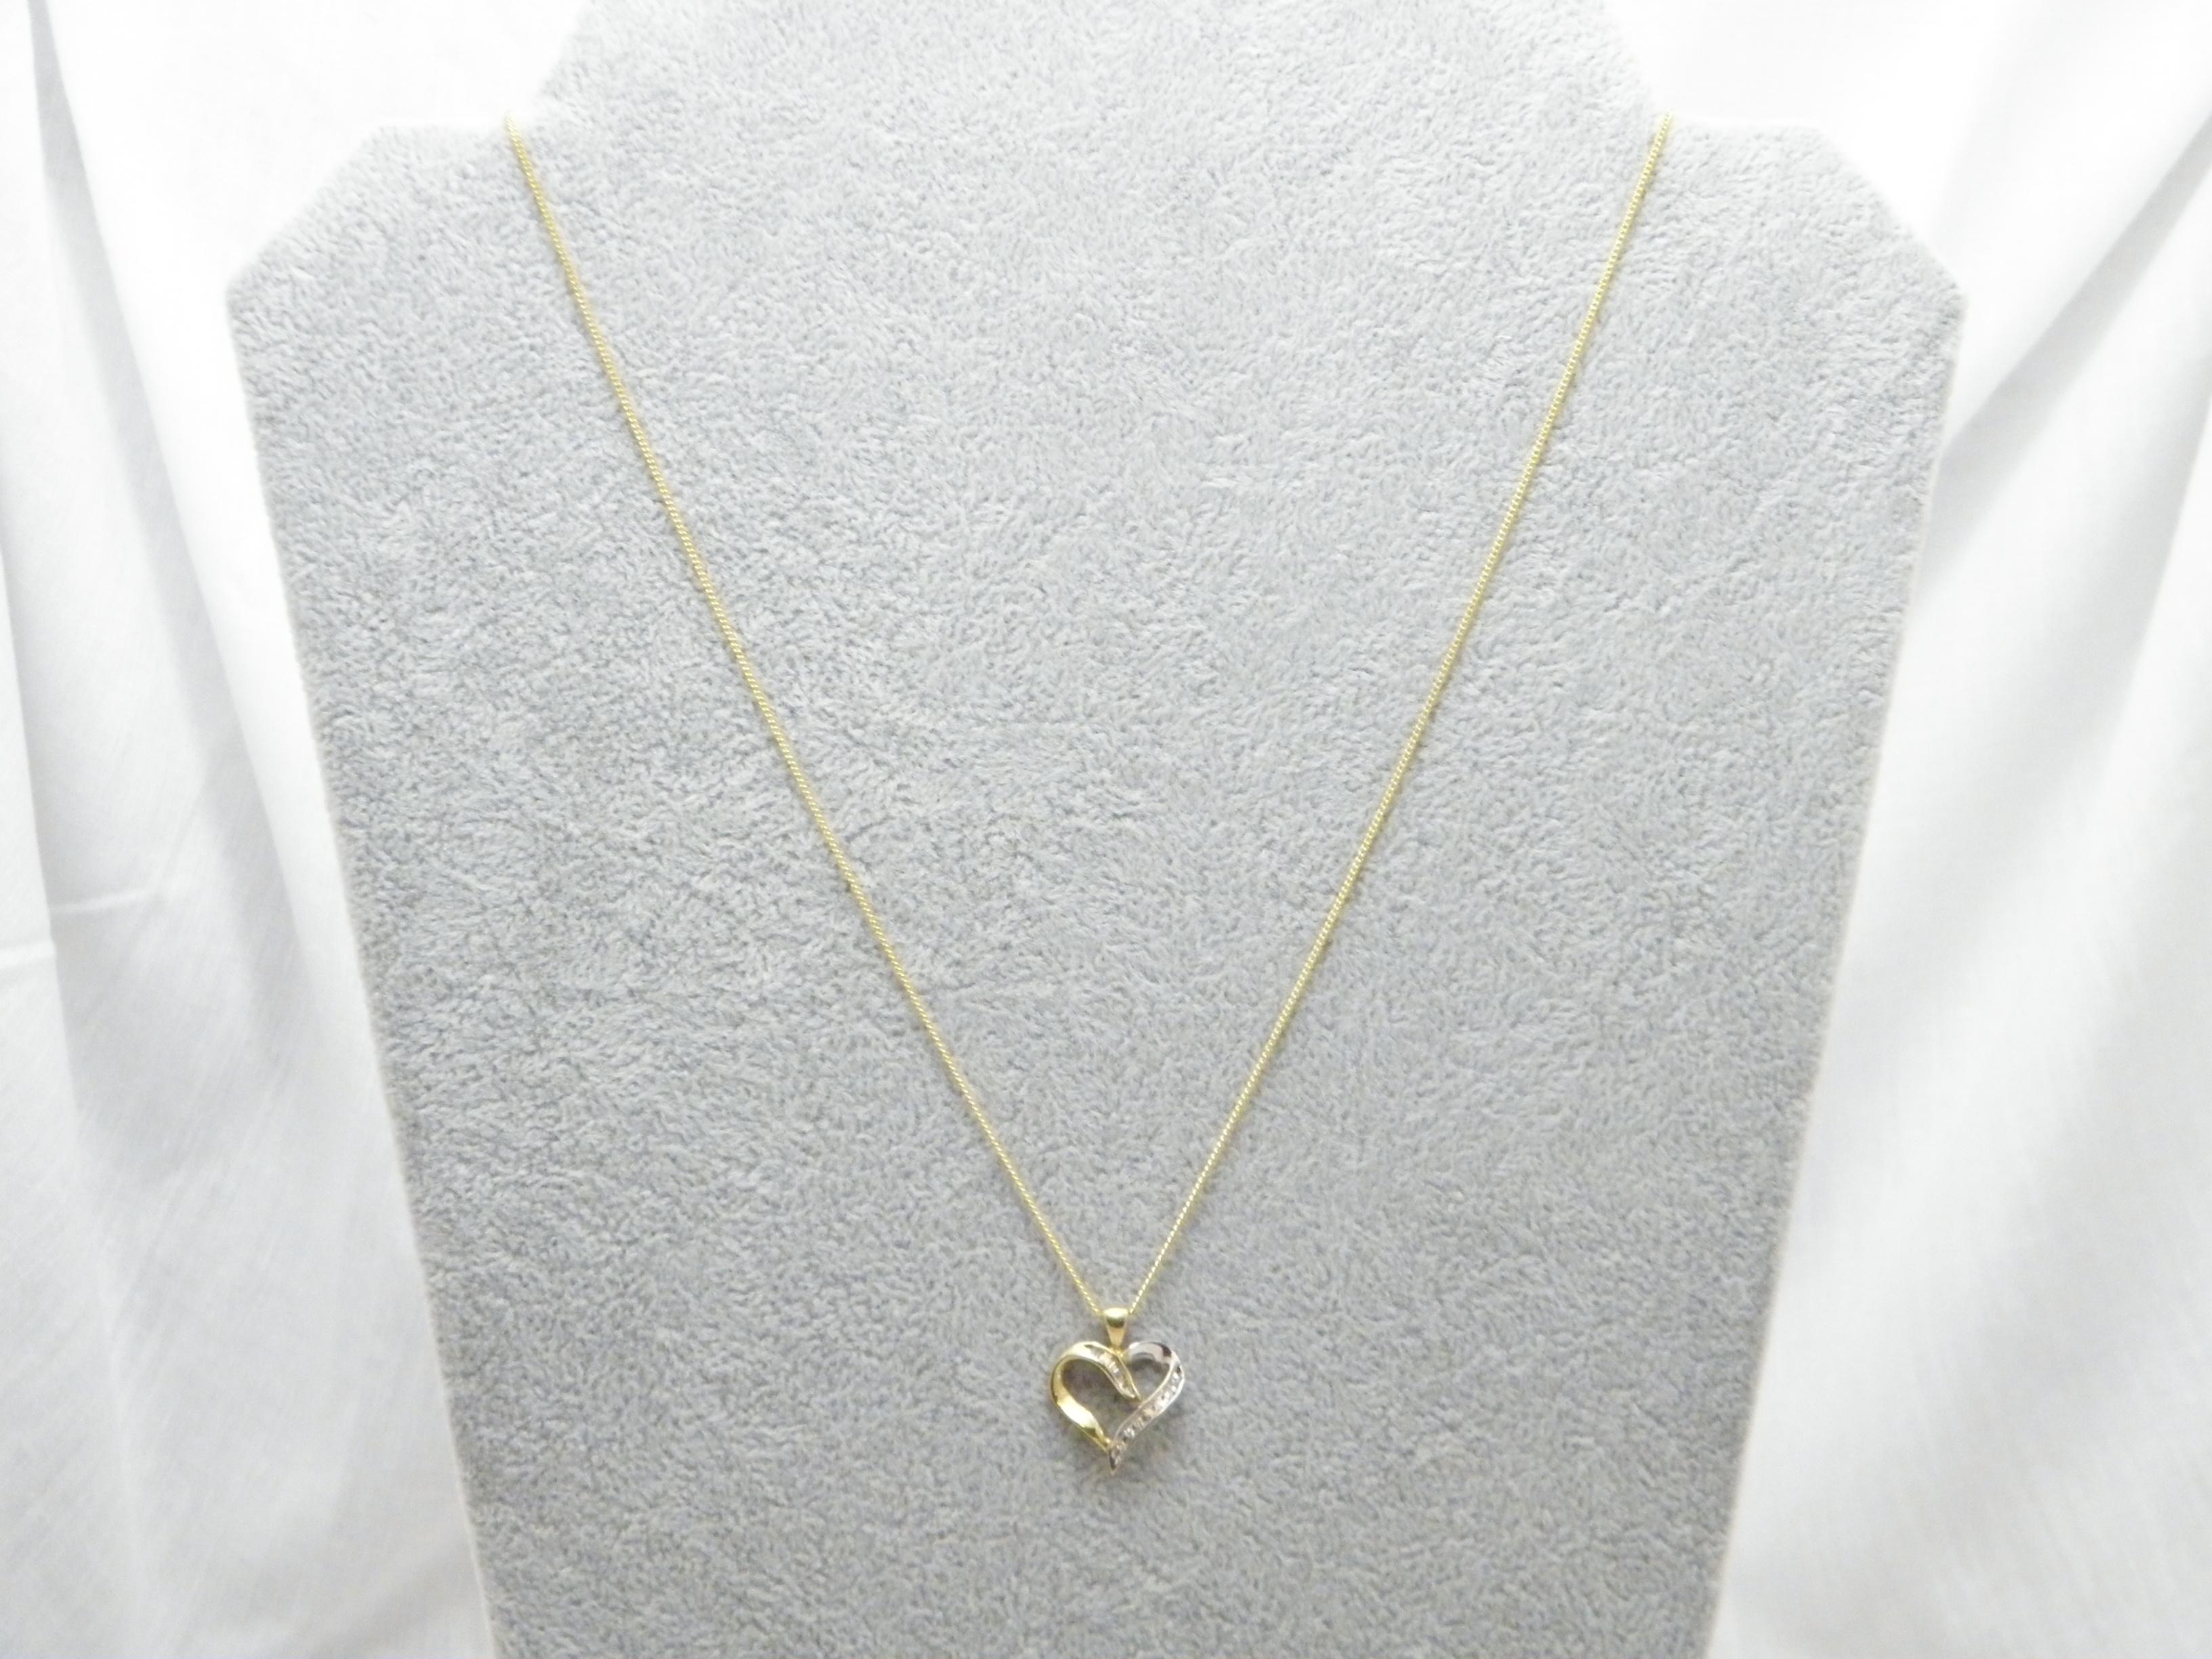 Vintage 9ct Gold 0.25 Cttw Diamond Heart Pendant Necklace Curb Chain 375 20 Inch For Sale 2